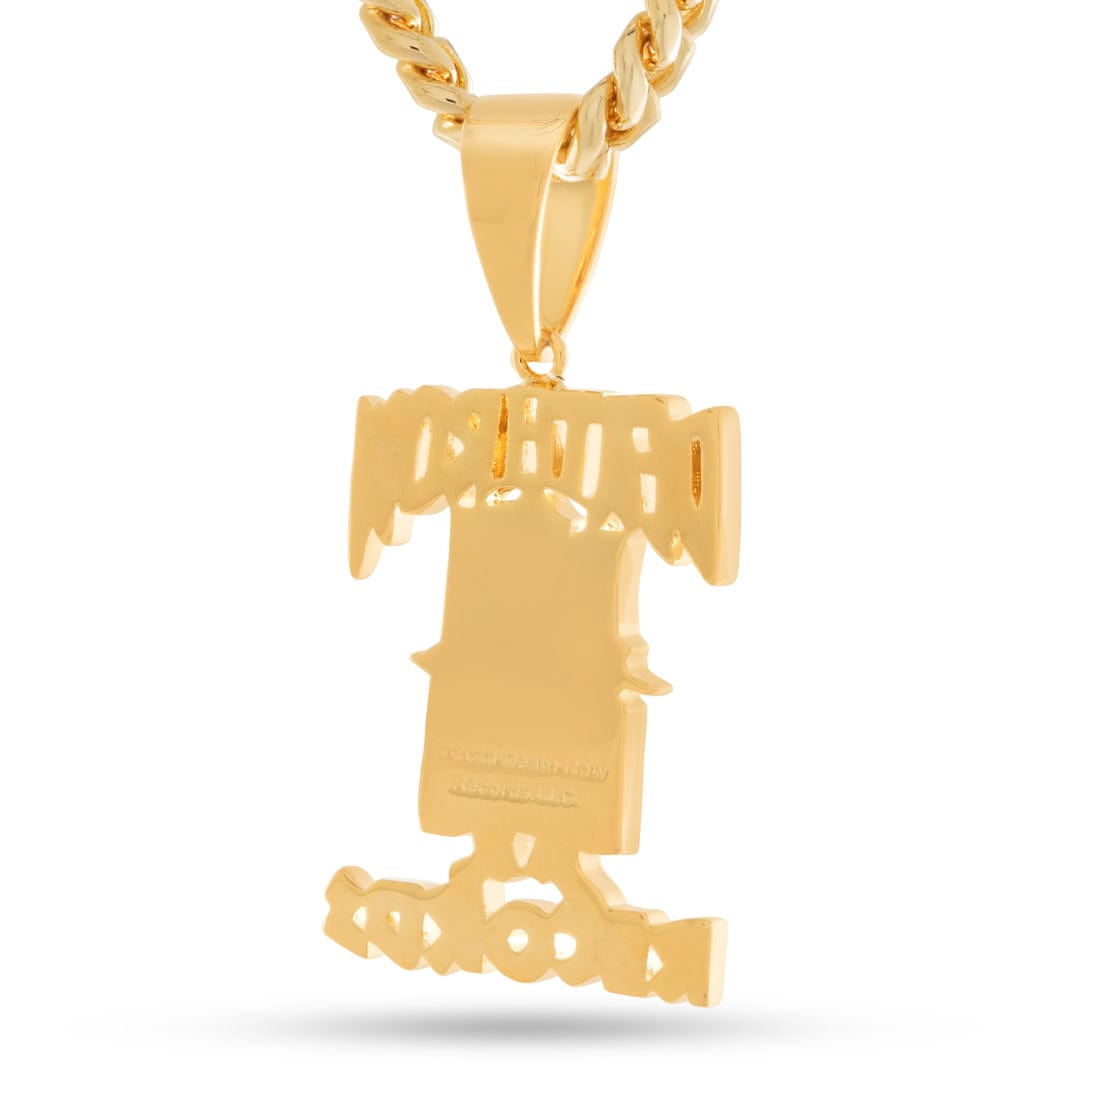 Selling an OG death row chain. Located in L.A. : r/Tupac